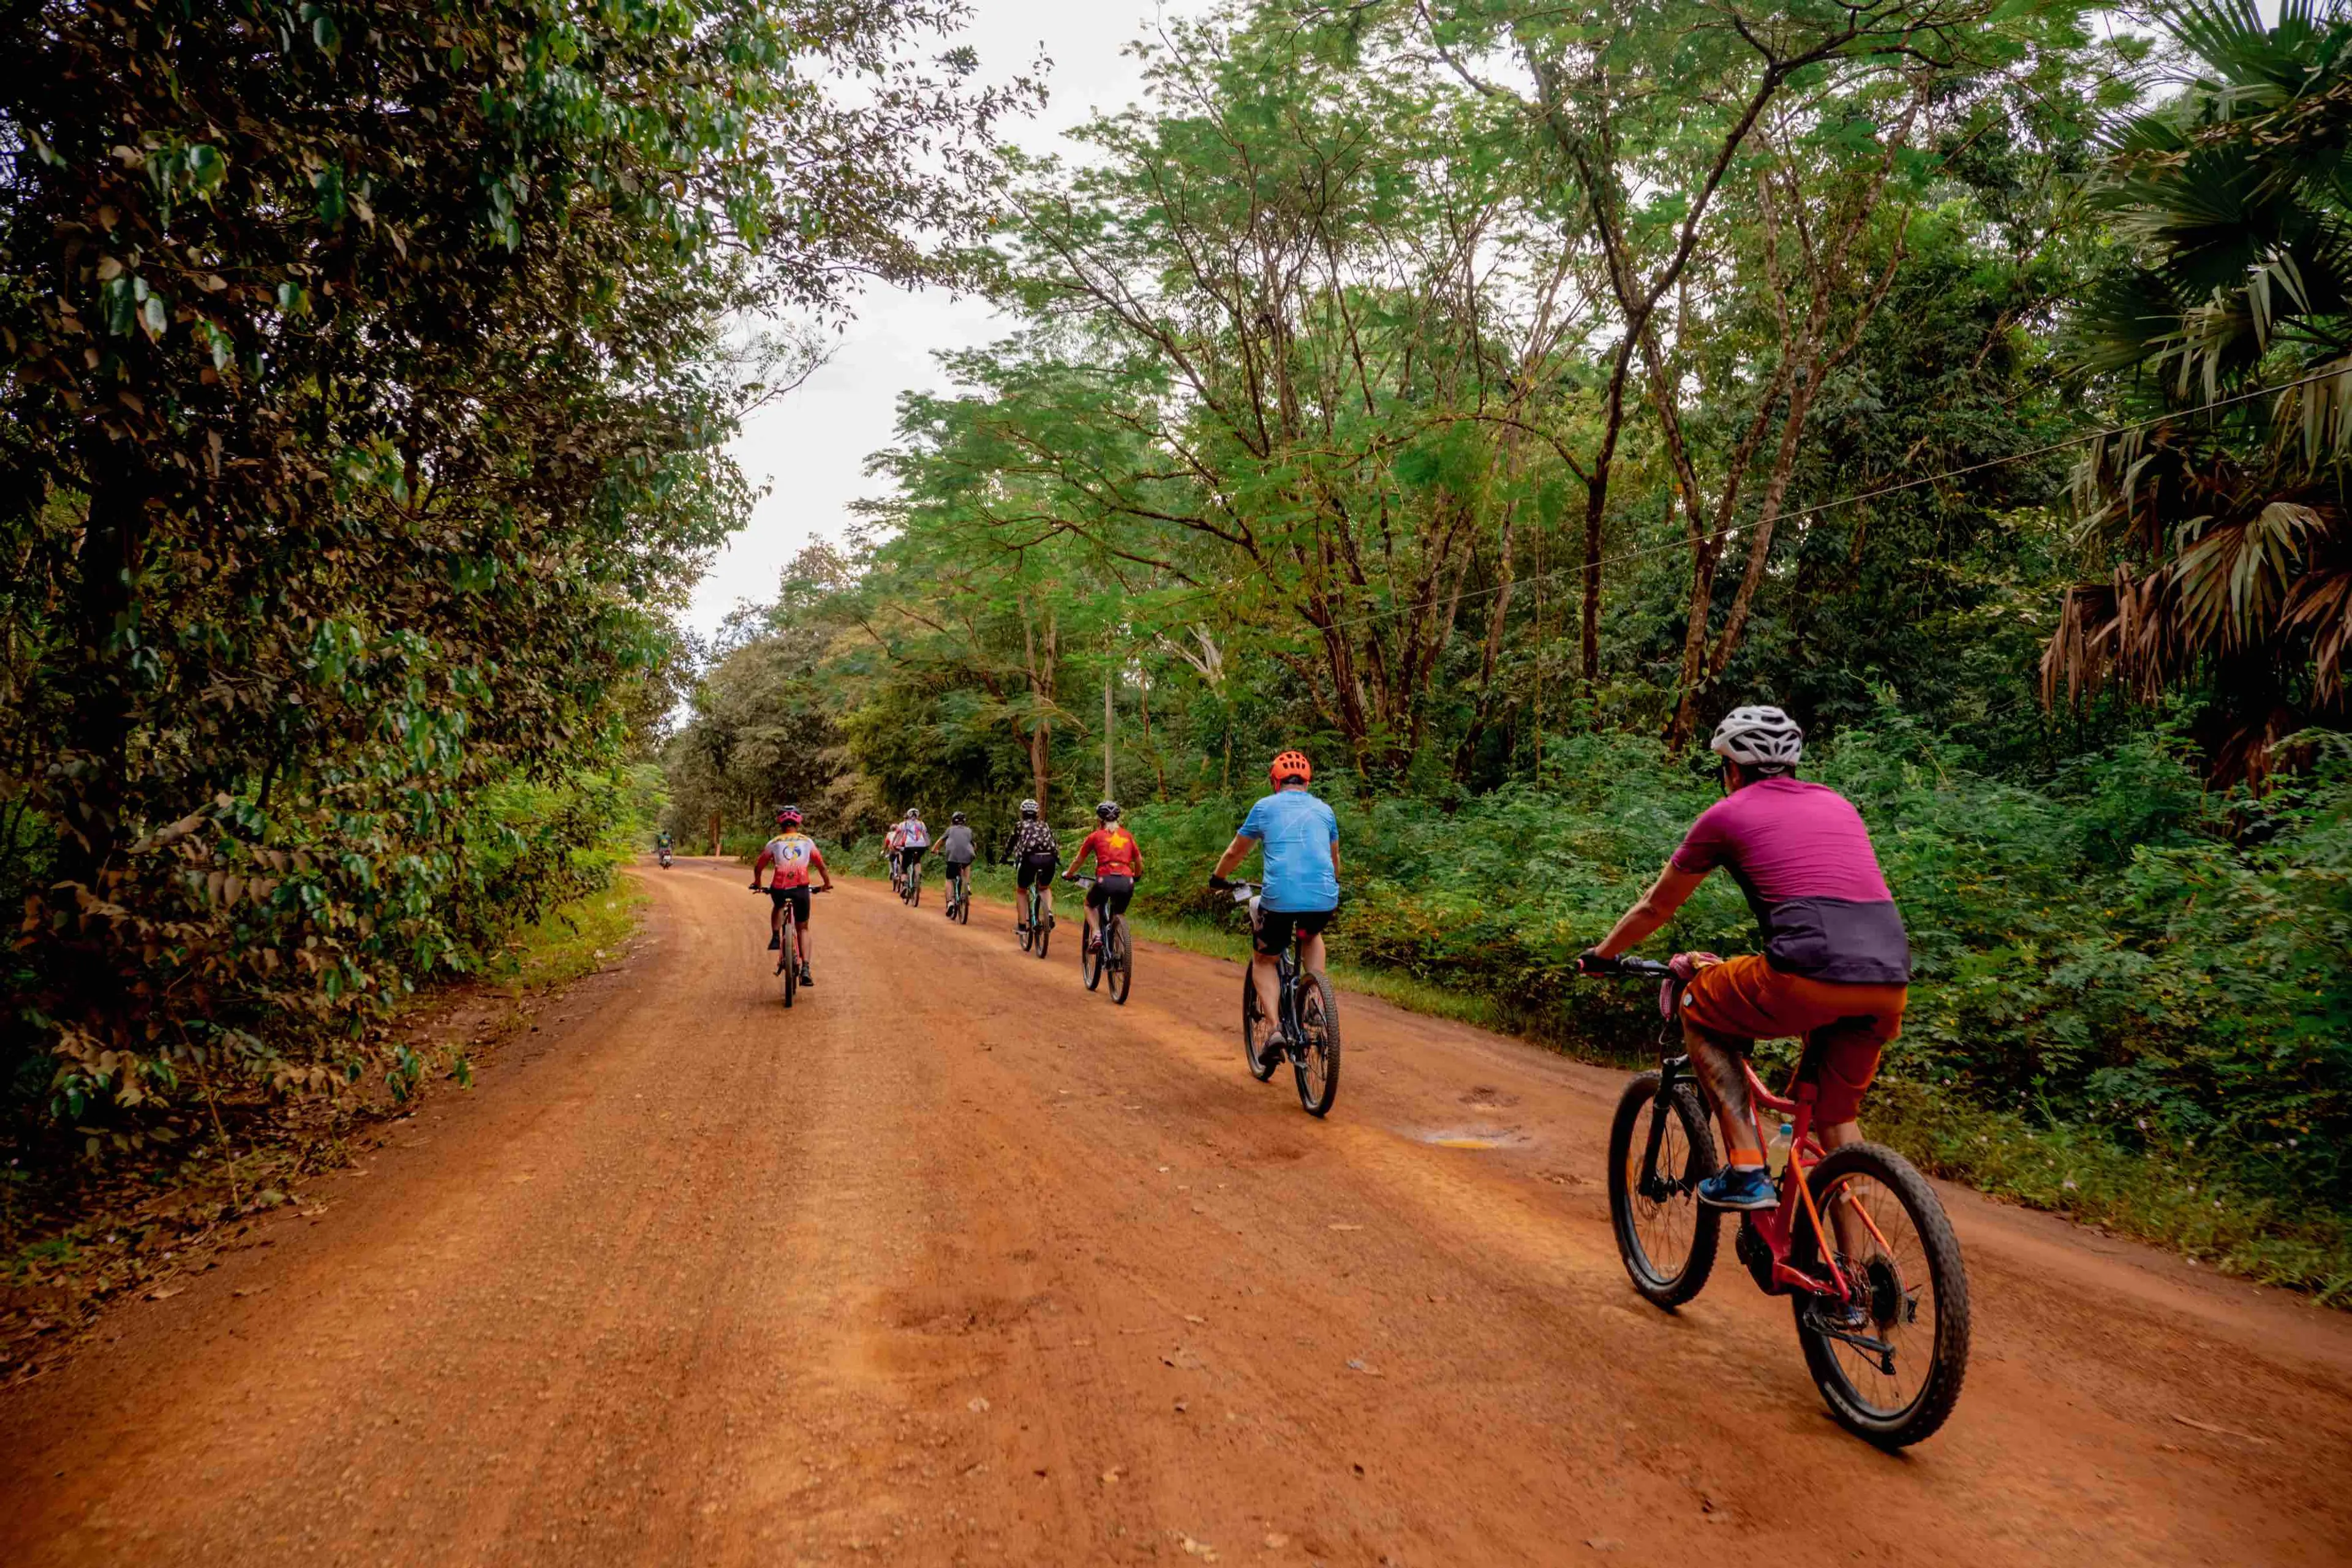 Cambodia With Flat Terrain Will Good For All Ages Of Cycling